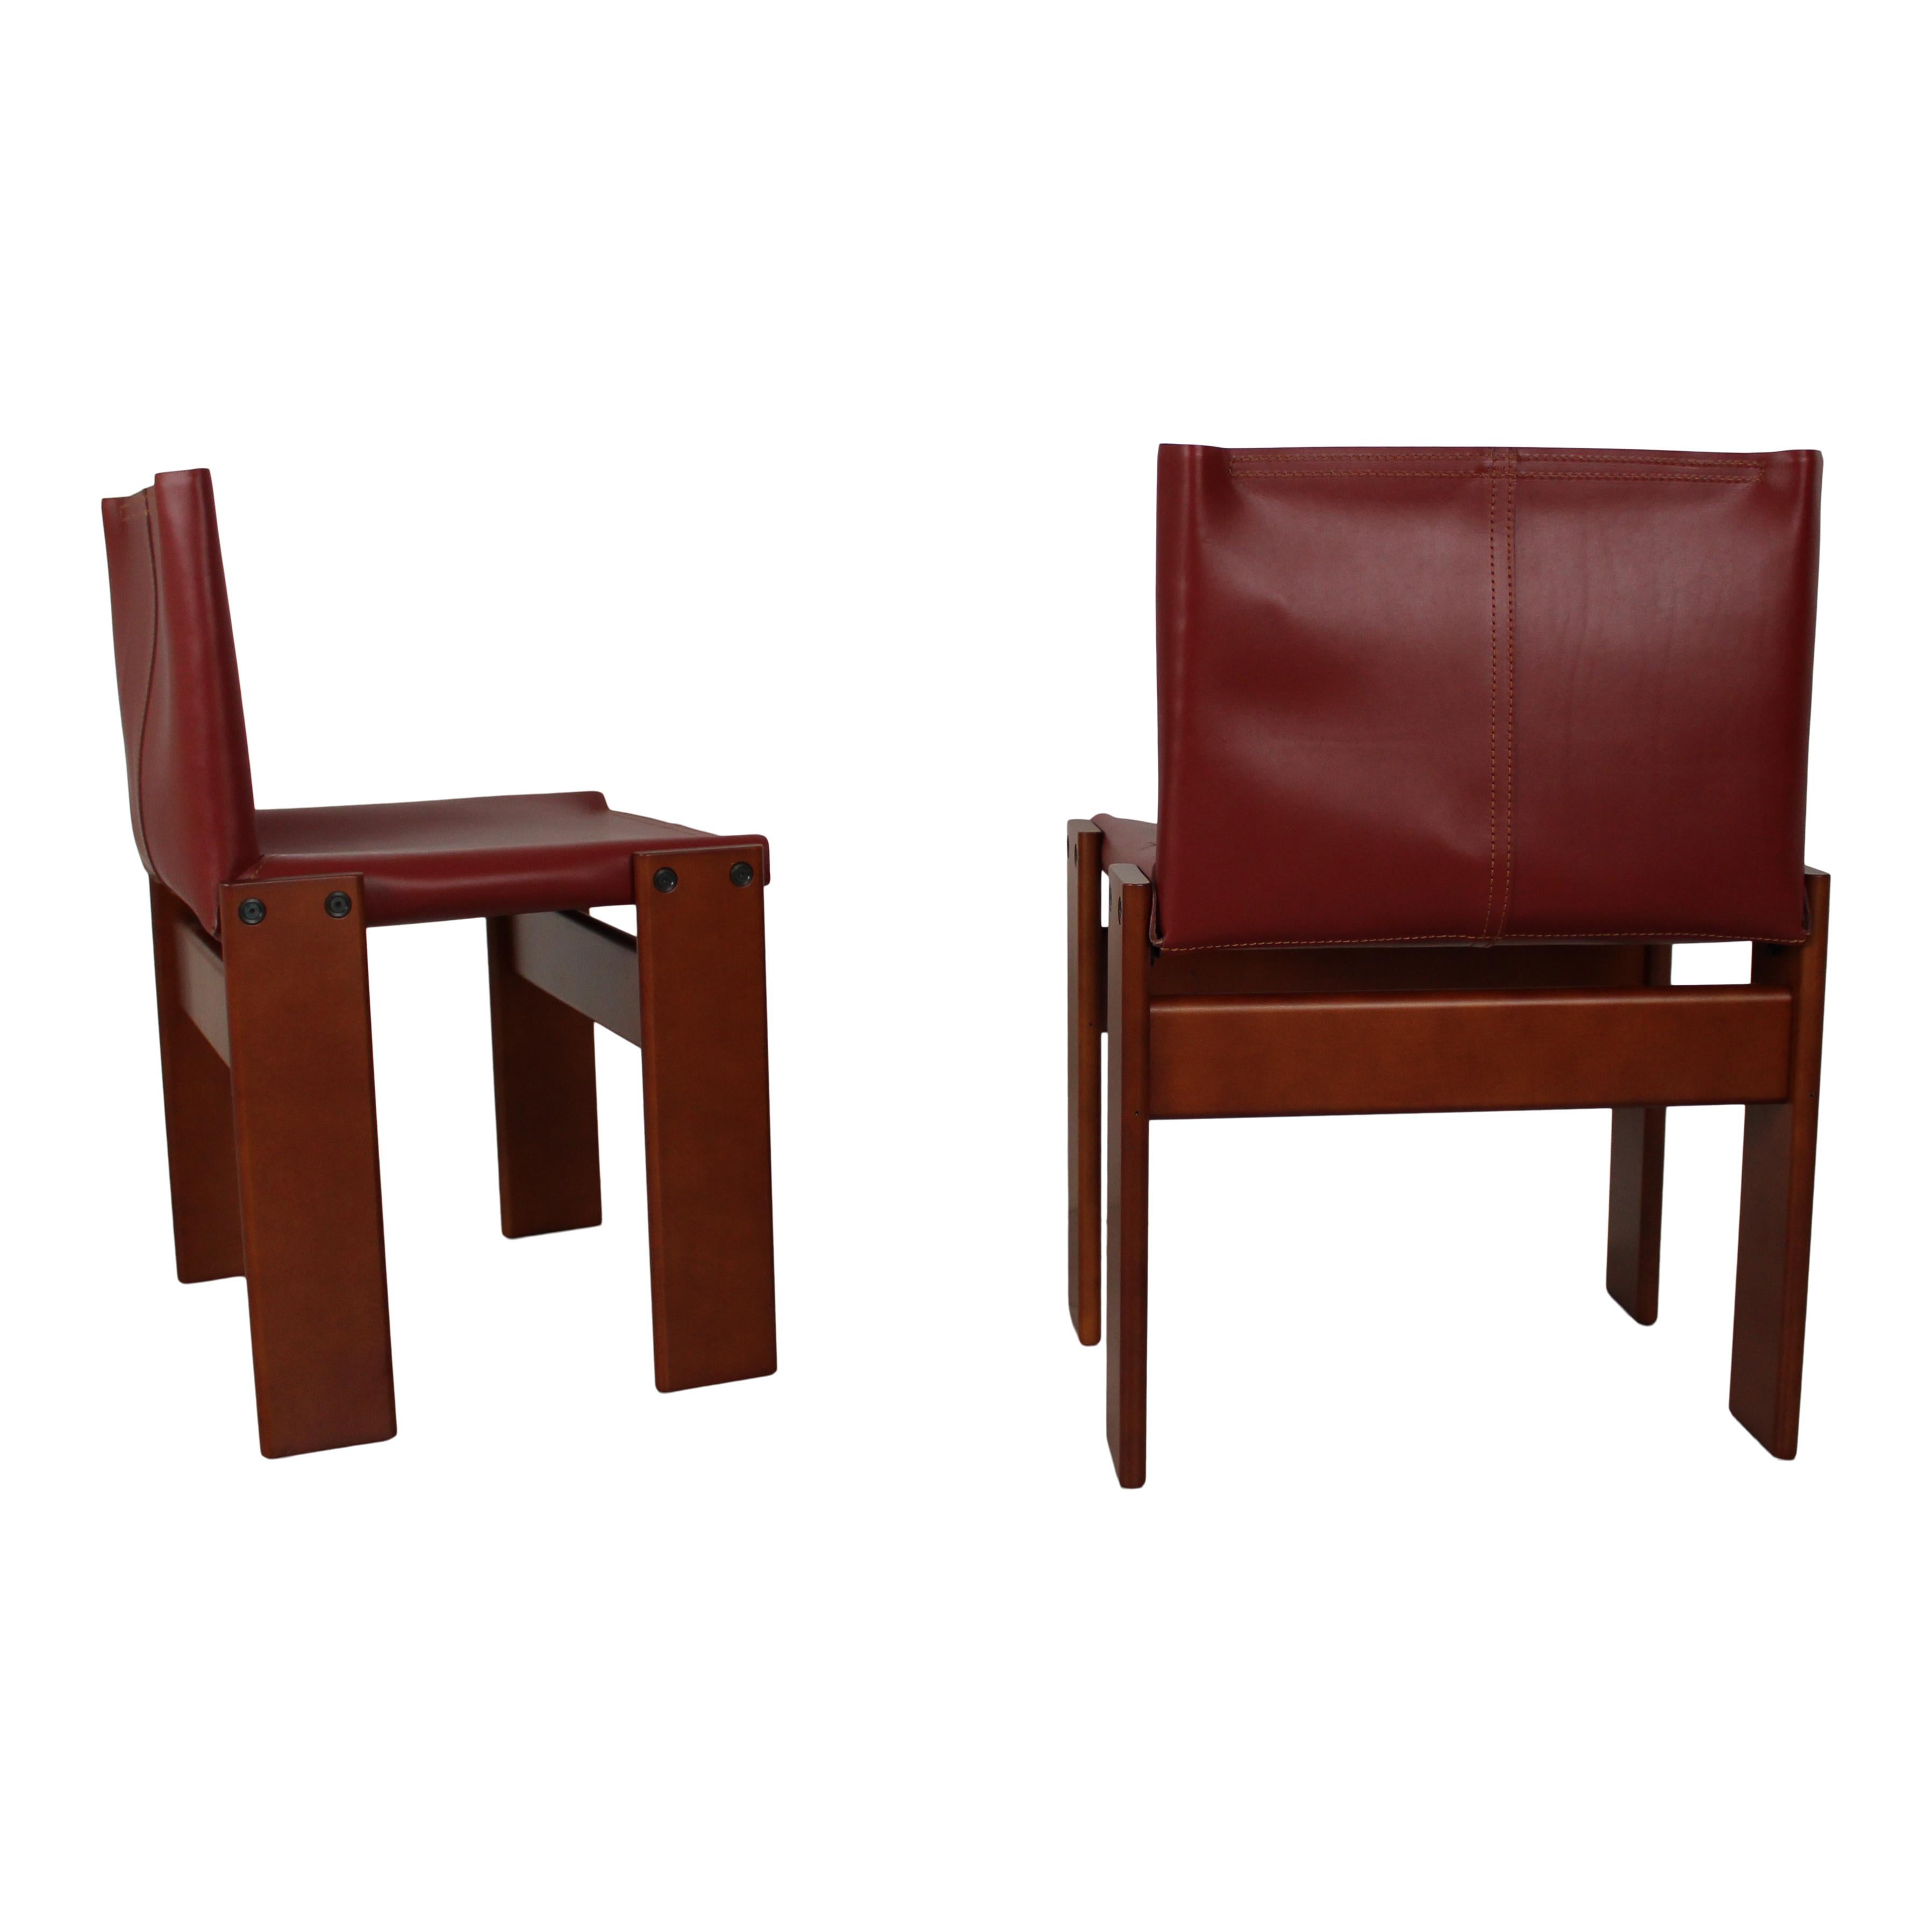 Afra & Tobia Scarpa English Red Leather Monk Dining Chair for Molteni, Set of 10 For Sale 6